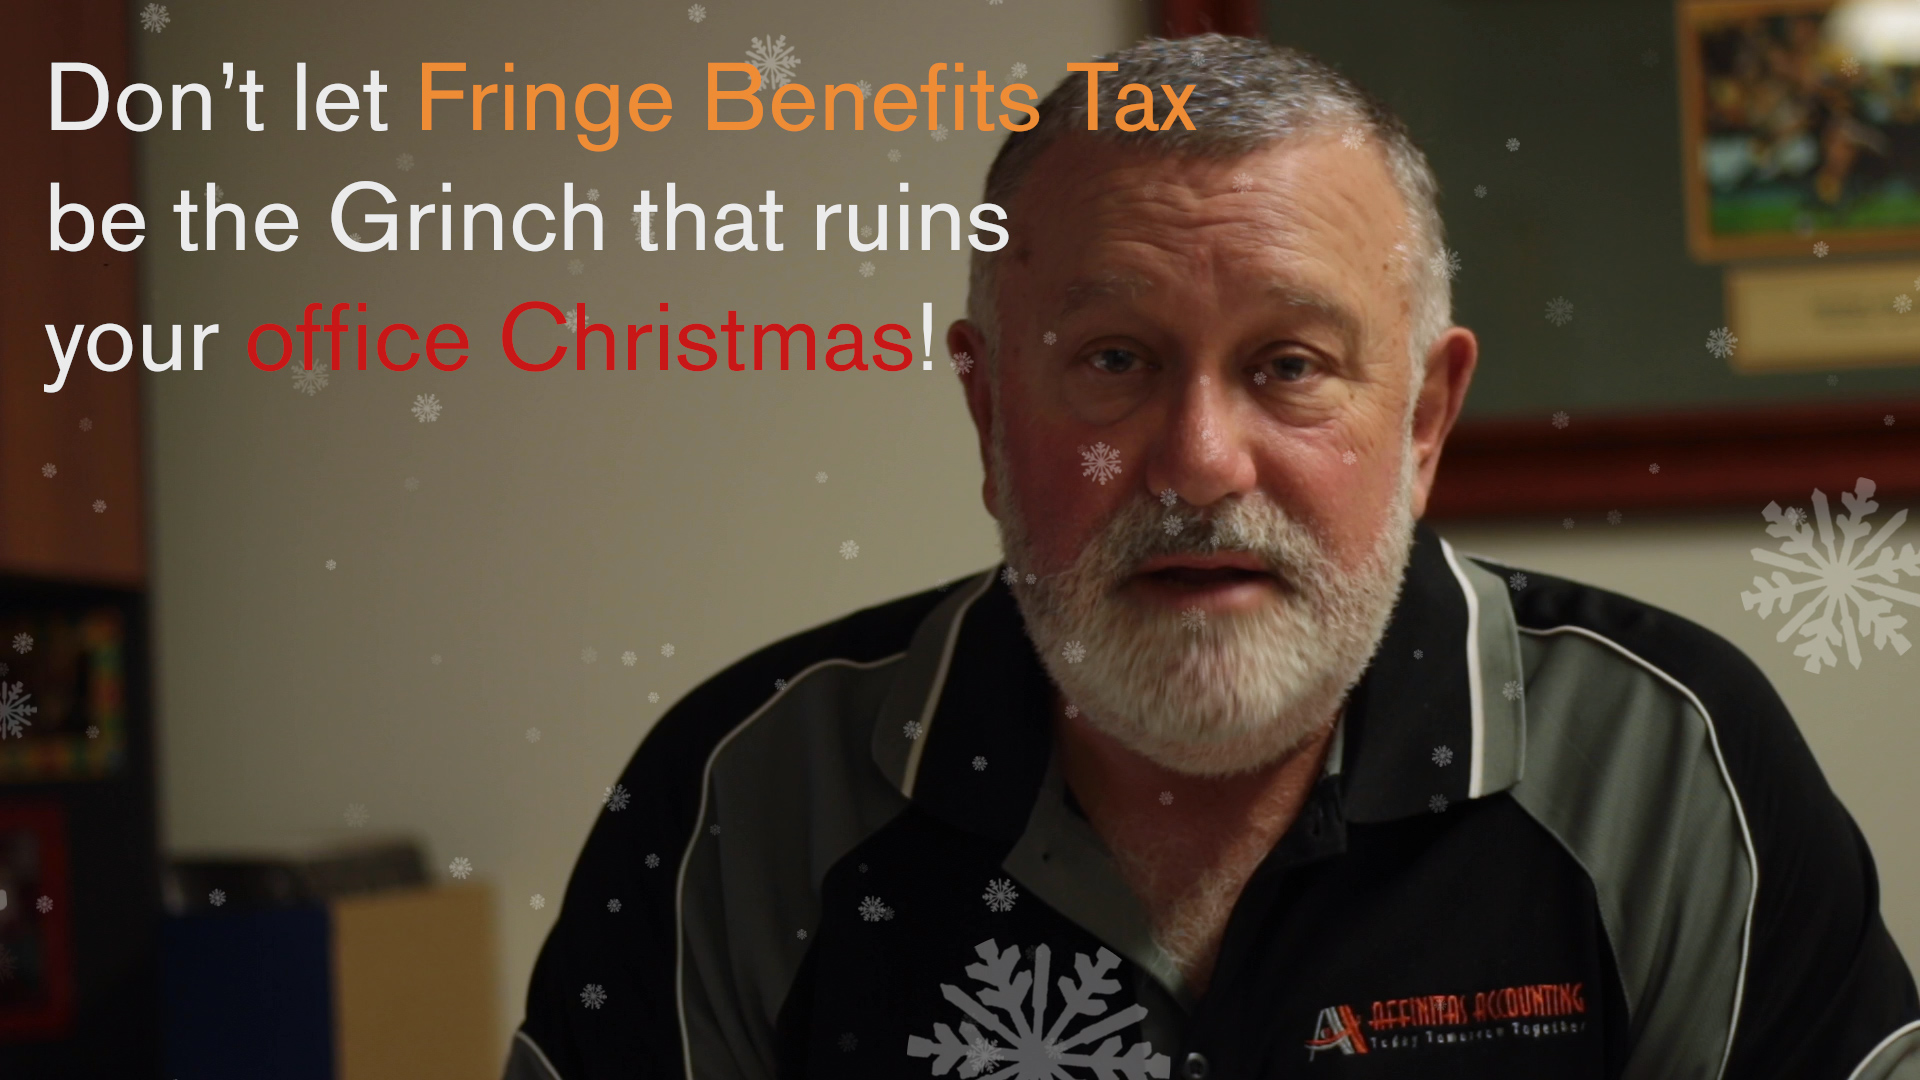 Don't let Fringe Benefits Tax ruin your office Christmas.